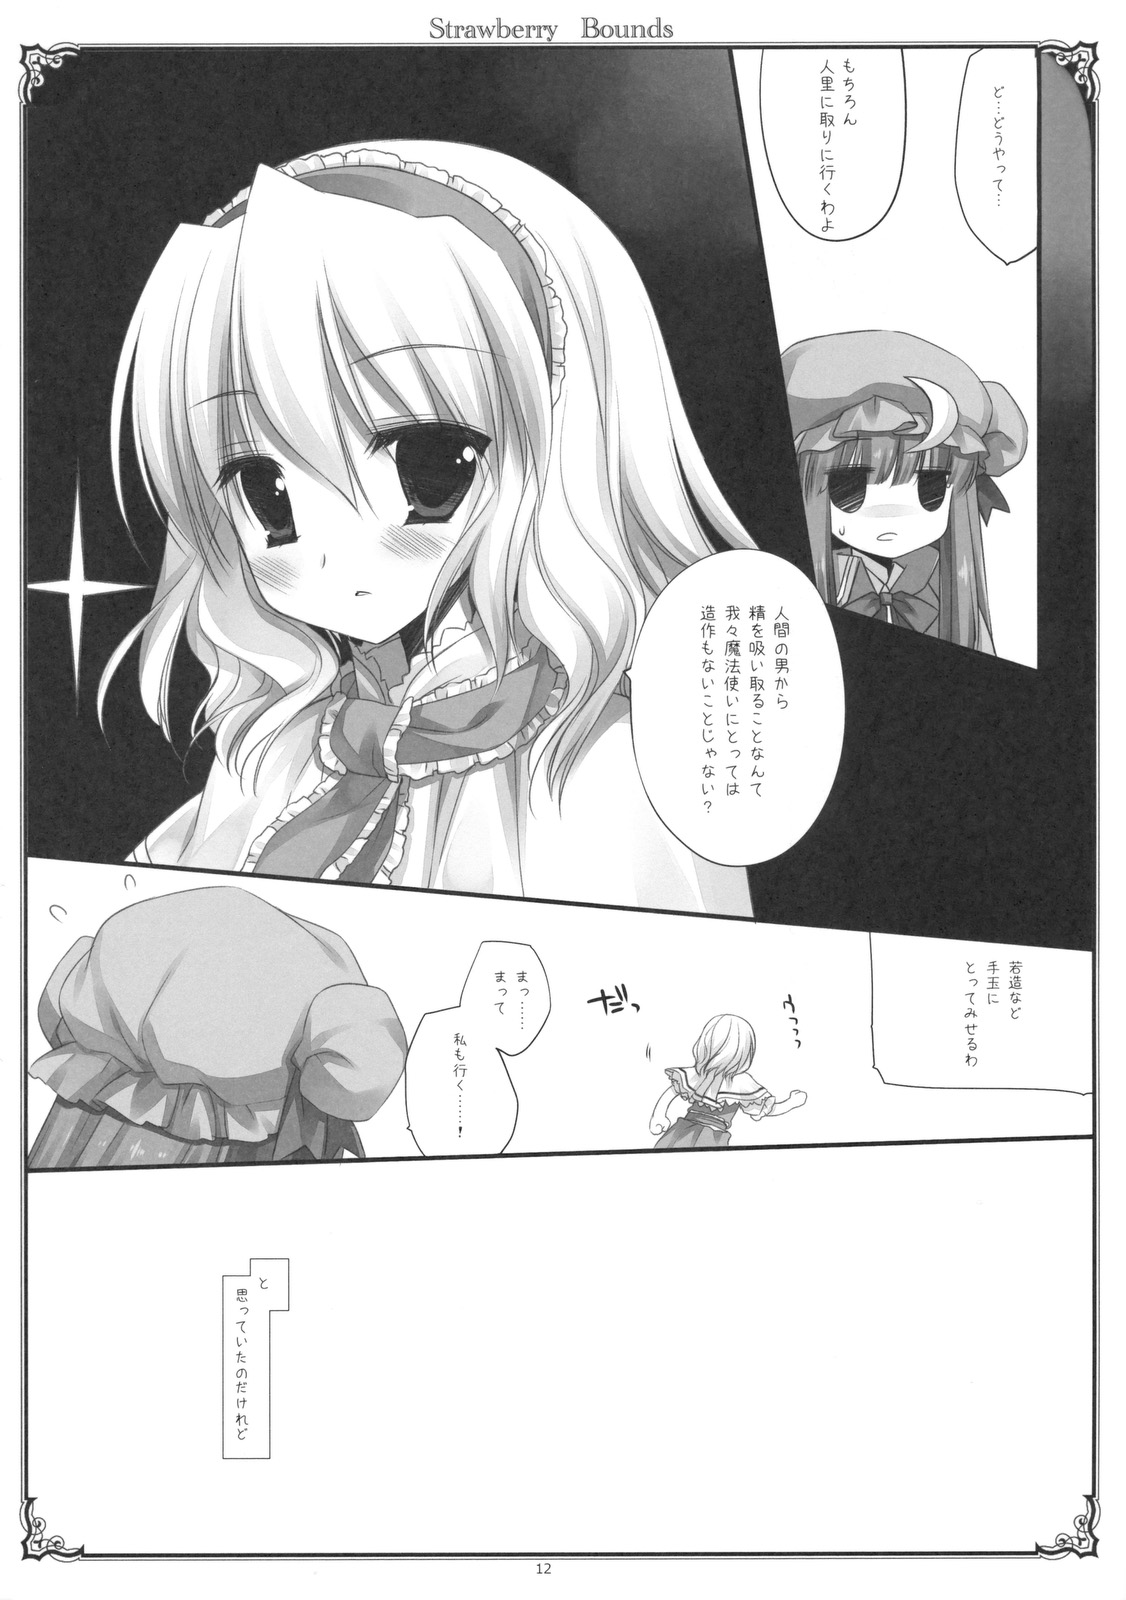 (C79) [D.N.A.Lab. (Miyasu Risa)] Strawberry Bounds (Touhou Project) (C79) (同人誌) [D・N・A.Lab. (ミヤスリサ)] Strawberry Bounds (東方)